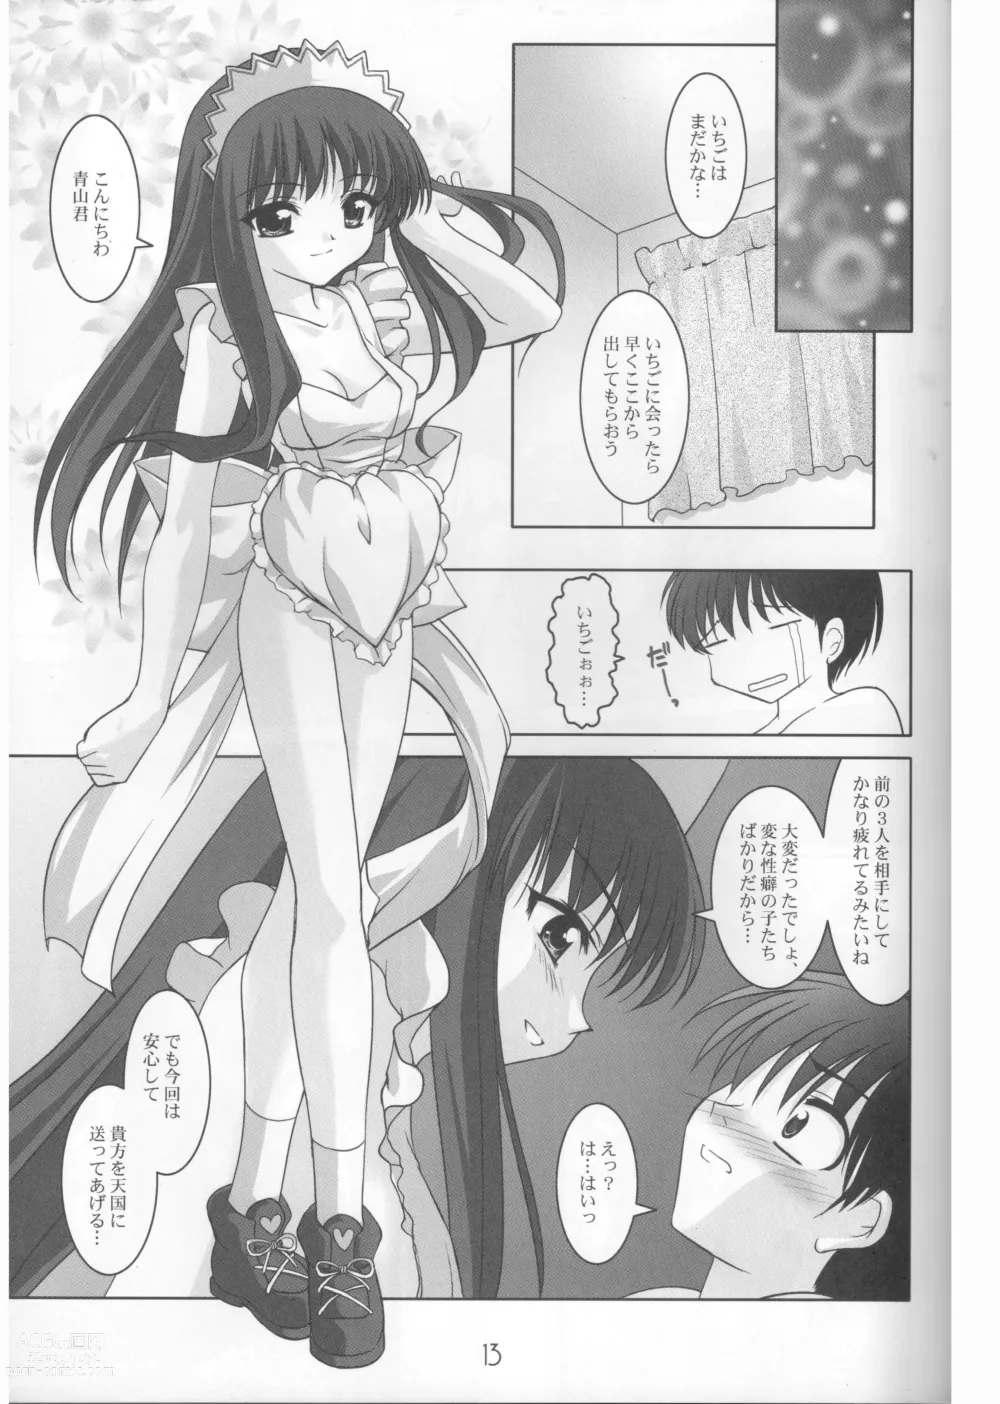 Page 14 of doujinshi Ring My Bell